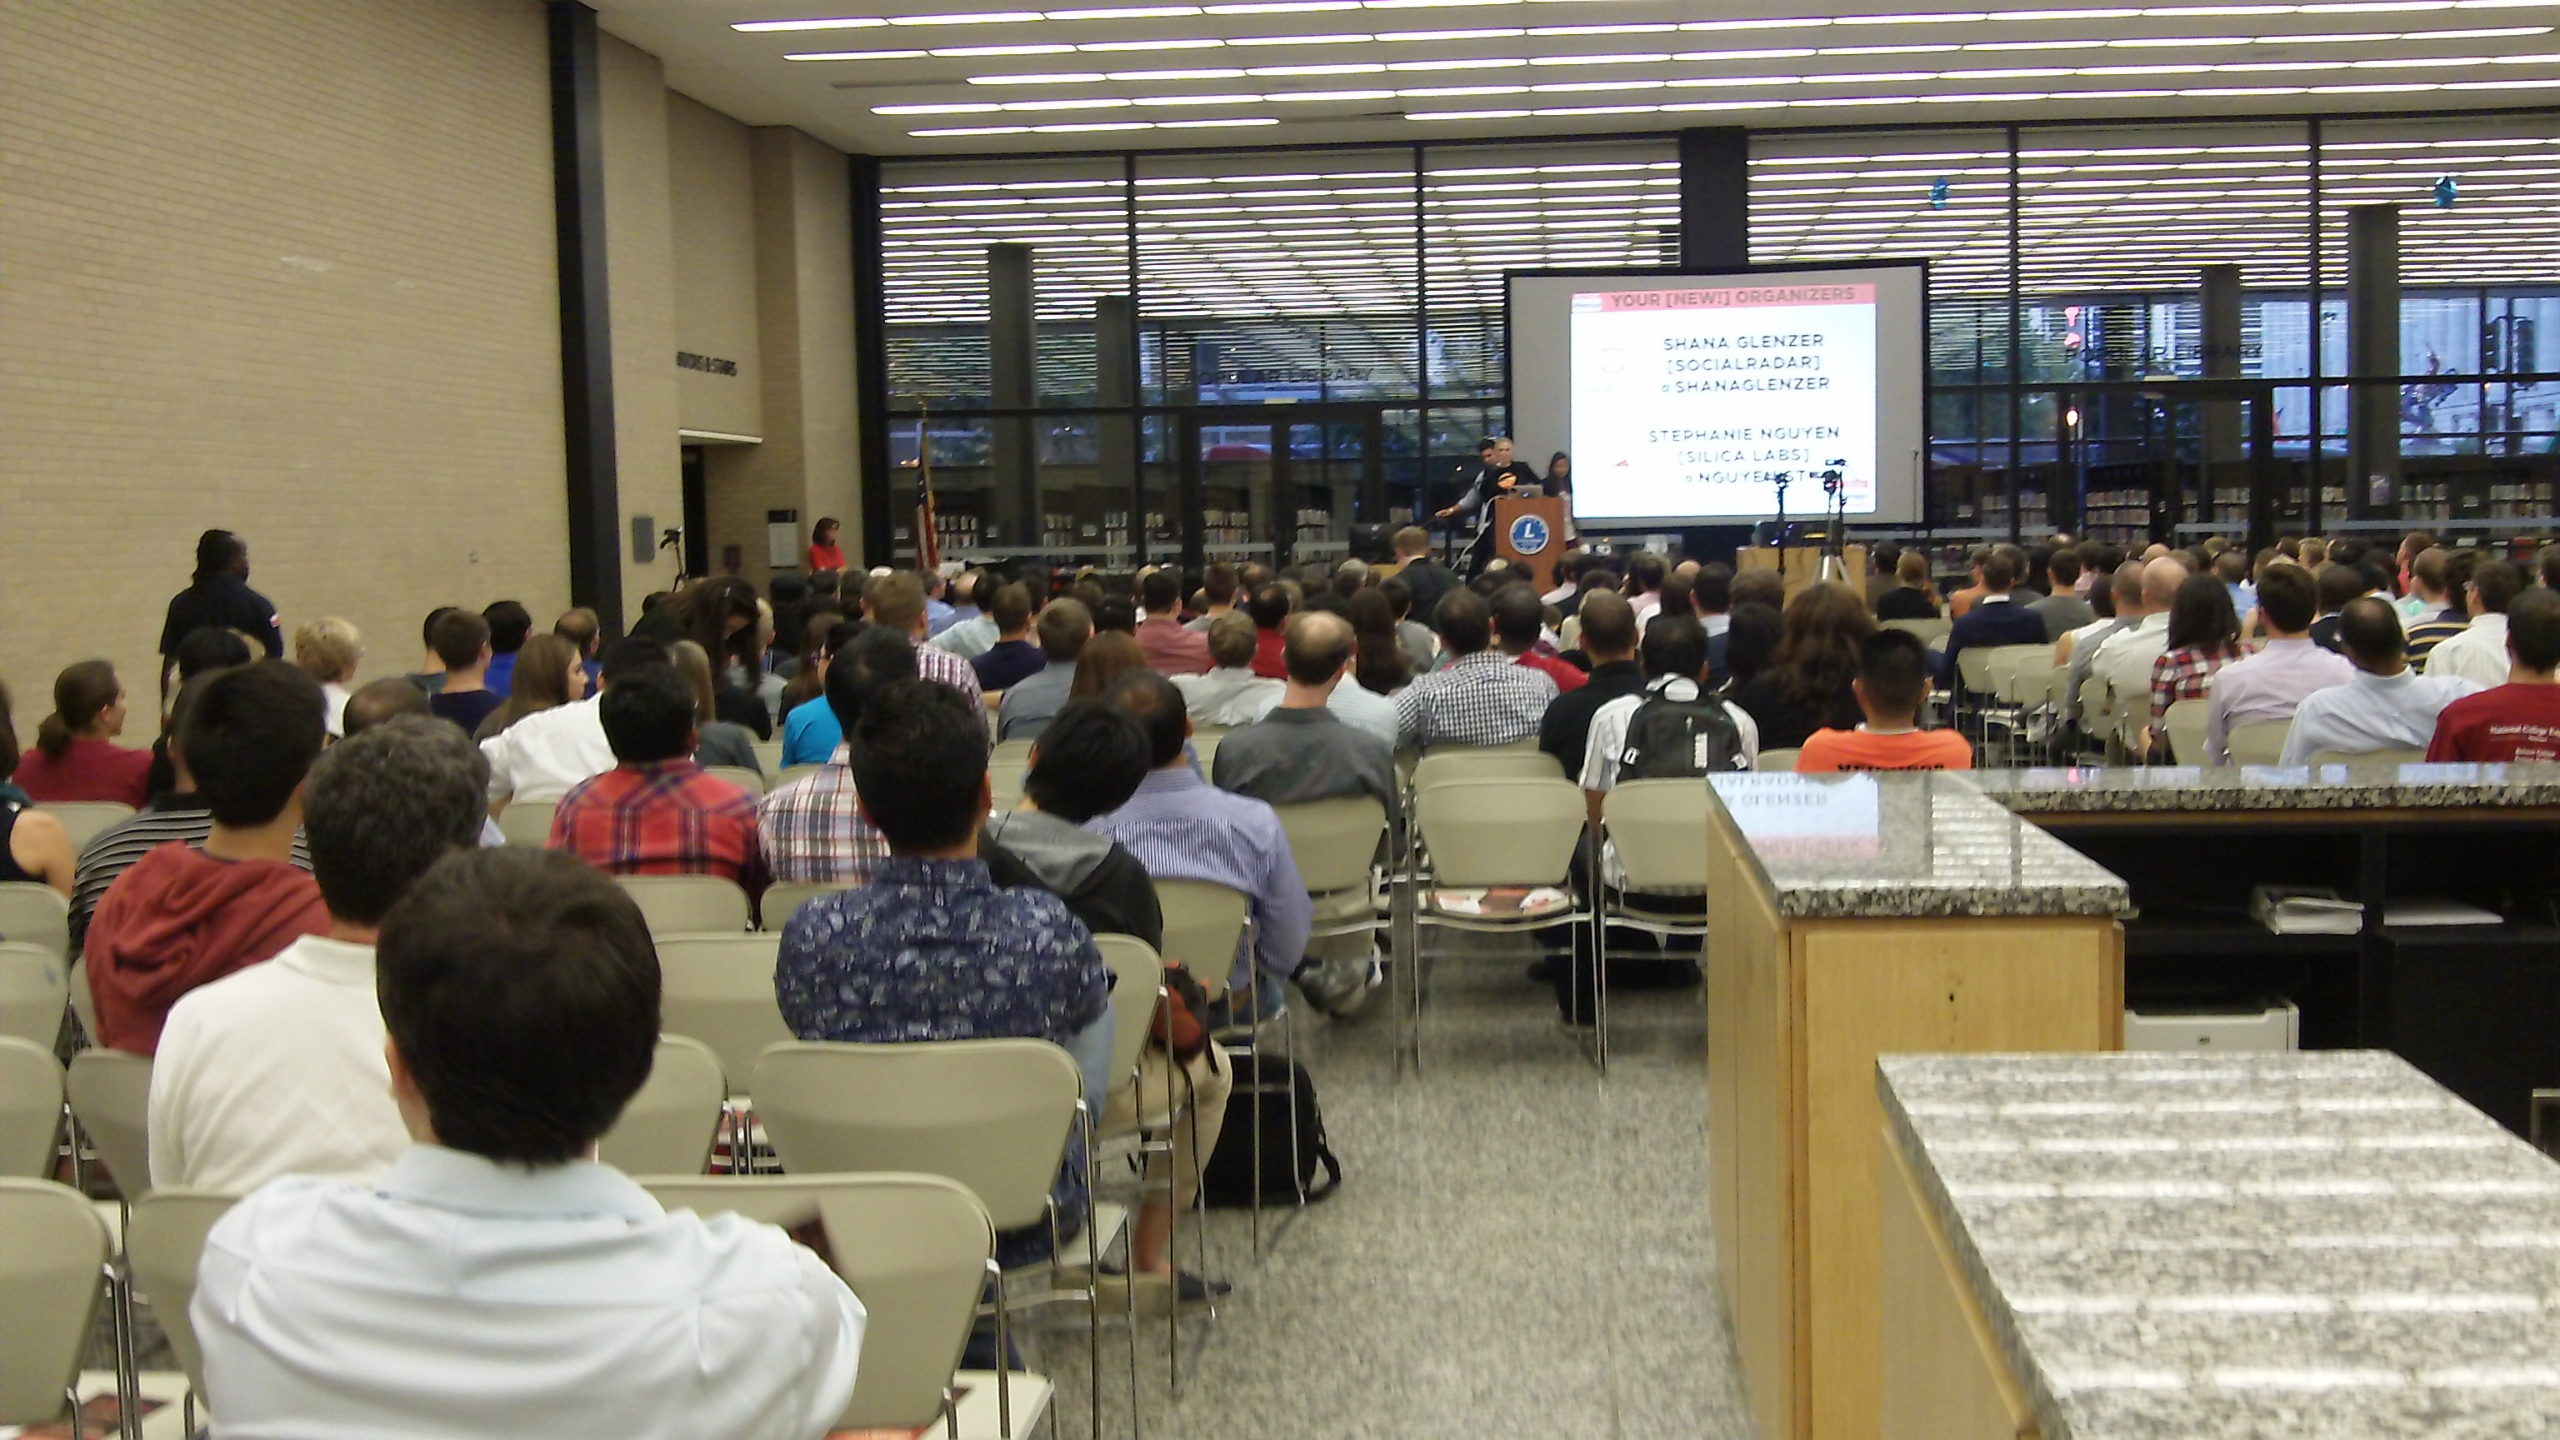 About 500 tech enthusiasts gathered at the Martin Luther King Jr. Memorial Library for a DC Tech Meetup.